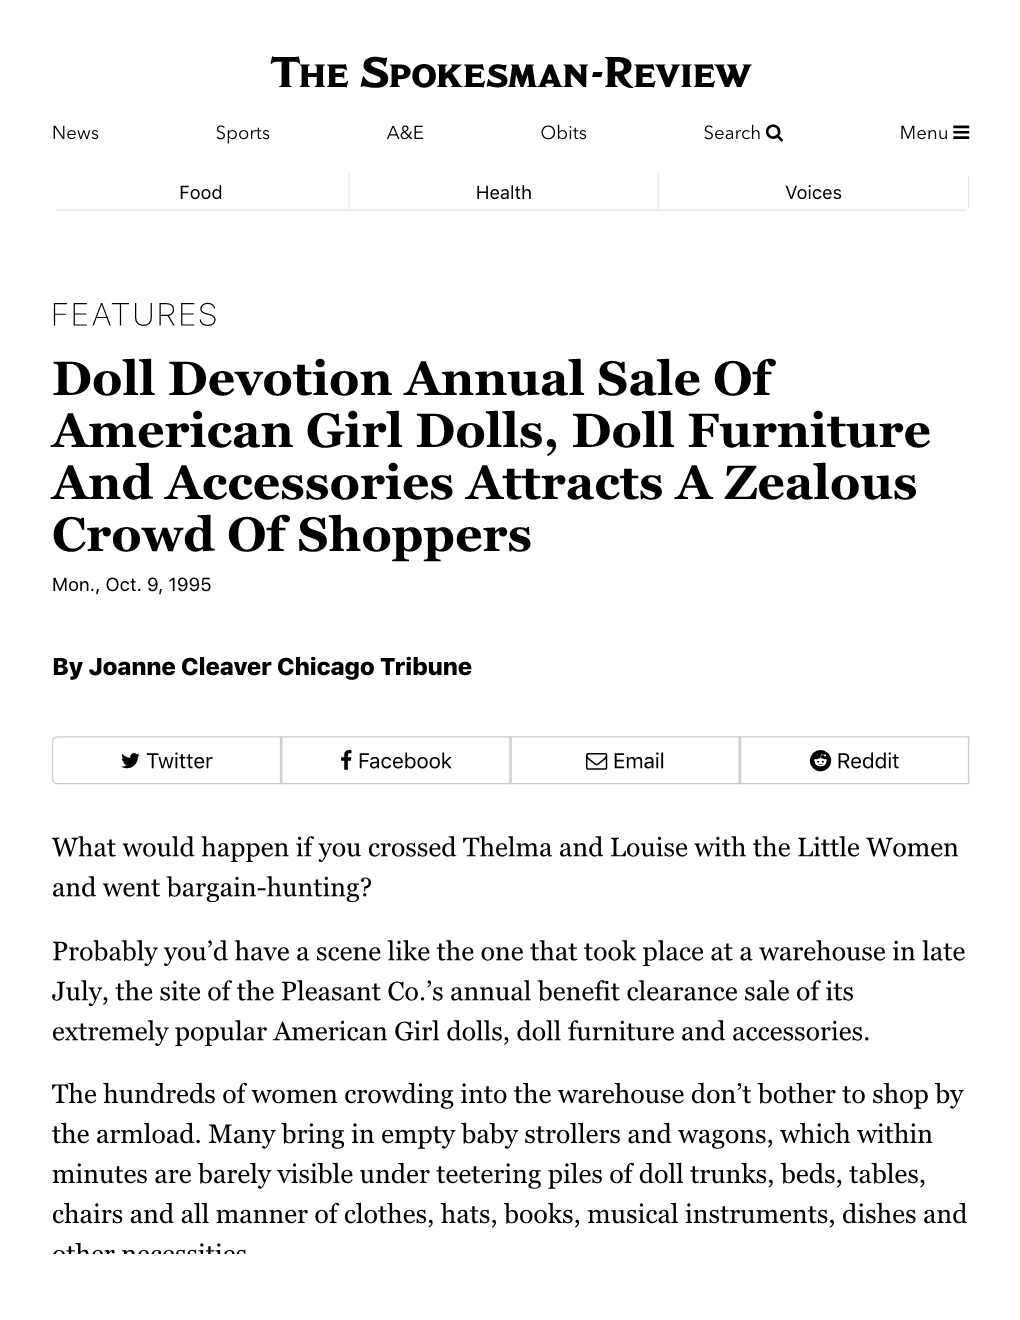 Doll Devotion Annual Sale of American Girl Dolls, Doll Furniture and Accessories Attracts a Zealous Crowd of Shoppers Mon., Oct